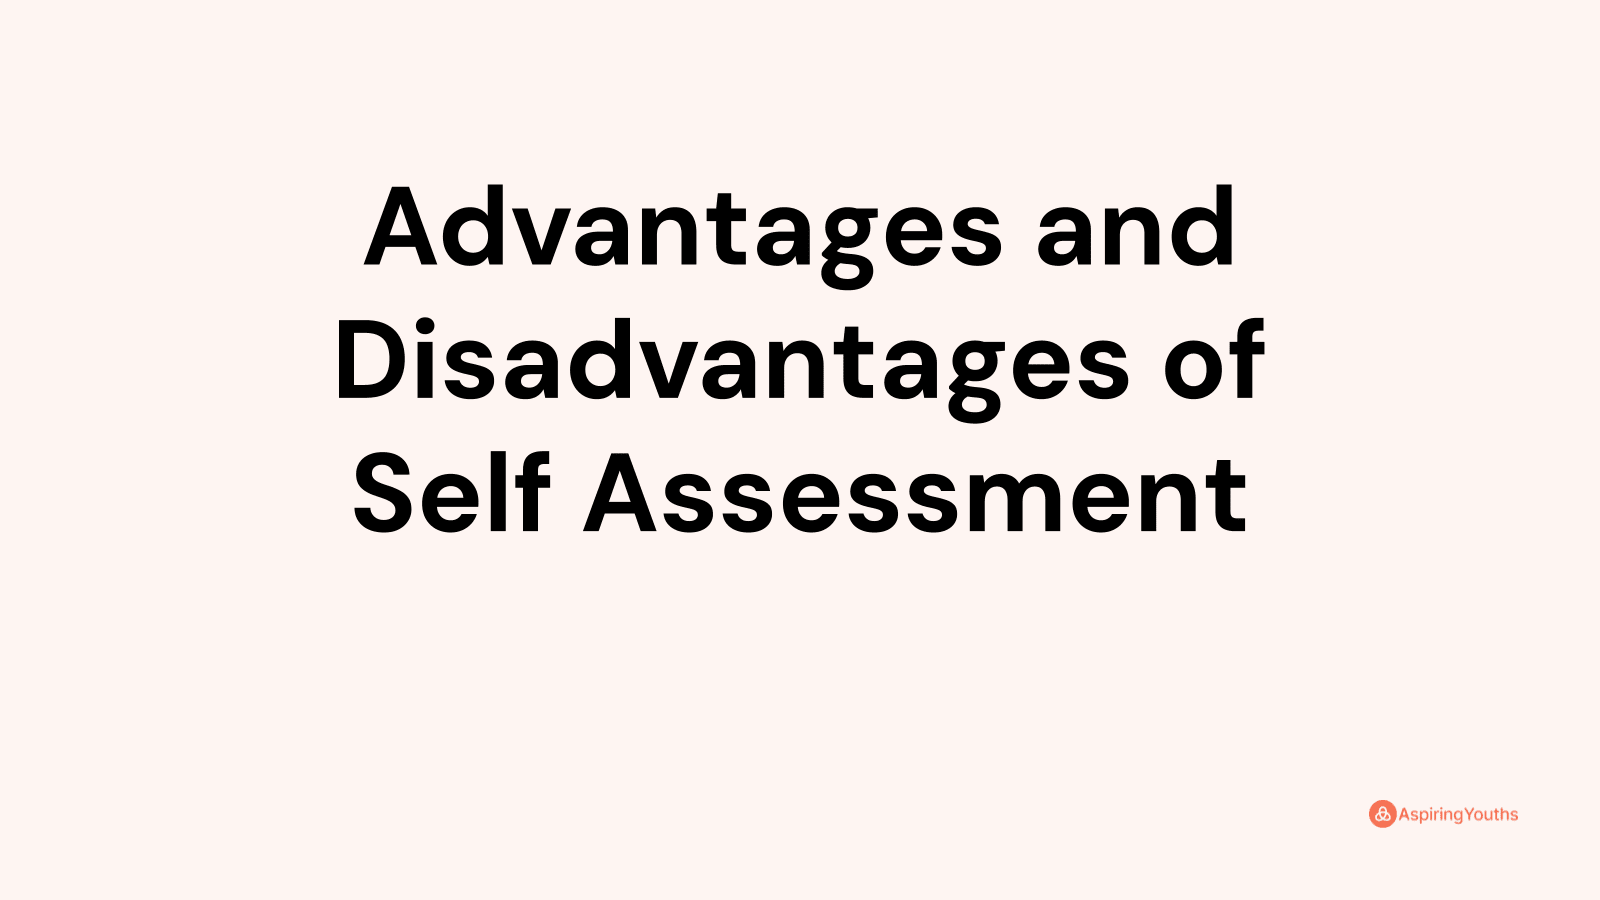 Advantages and disadvantages of Self Assessment